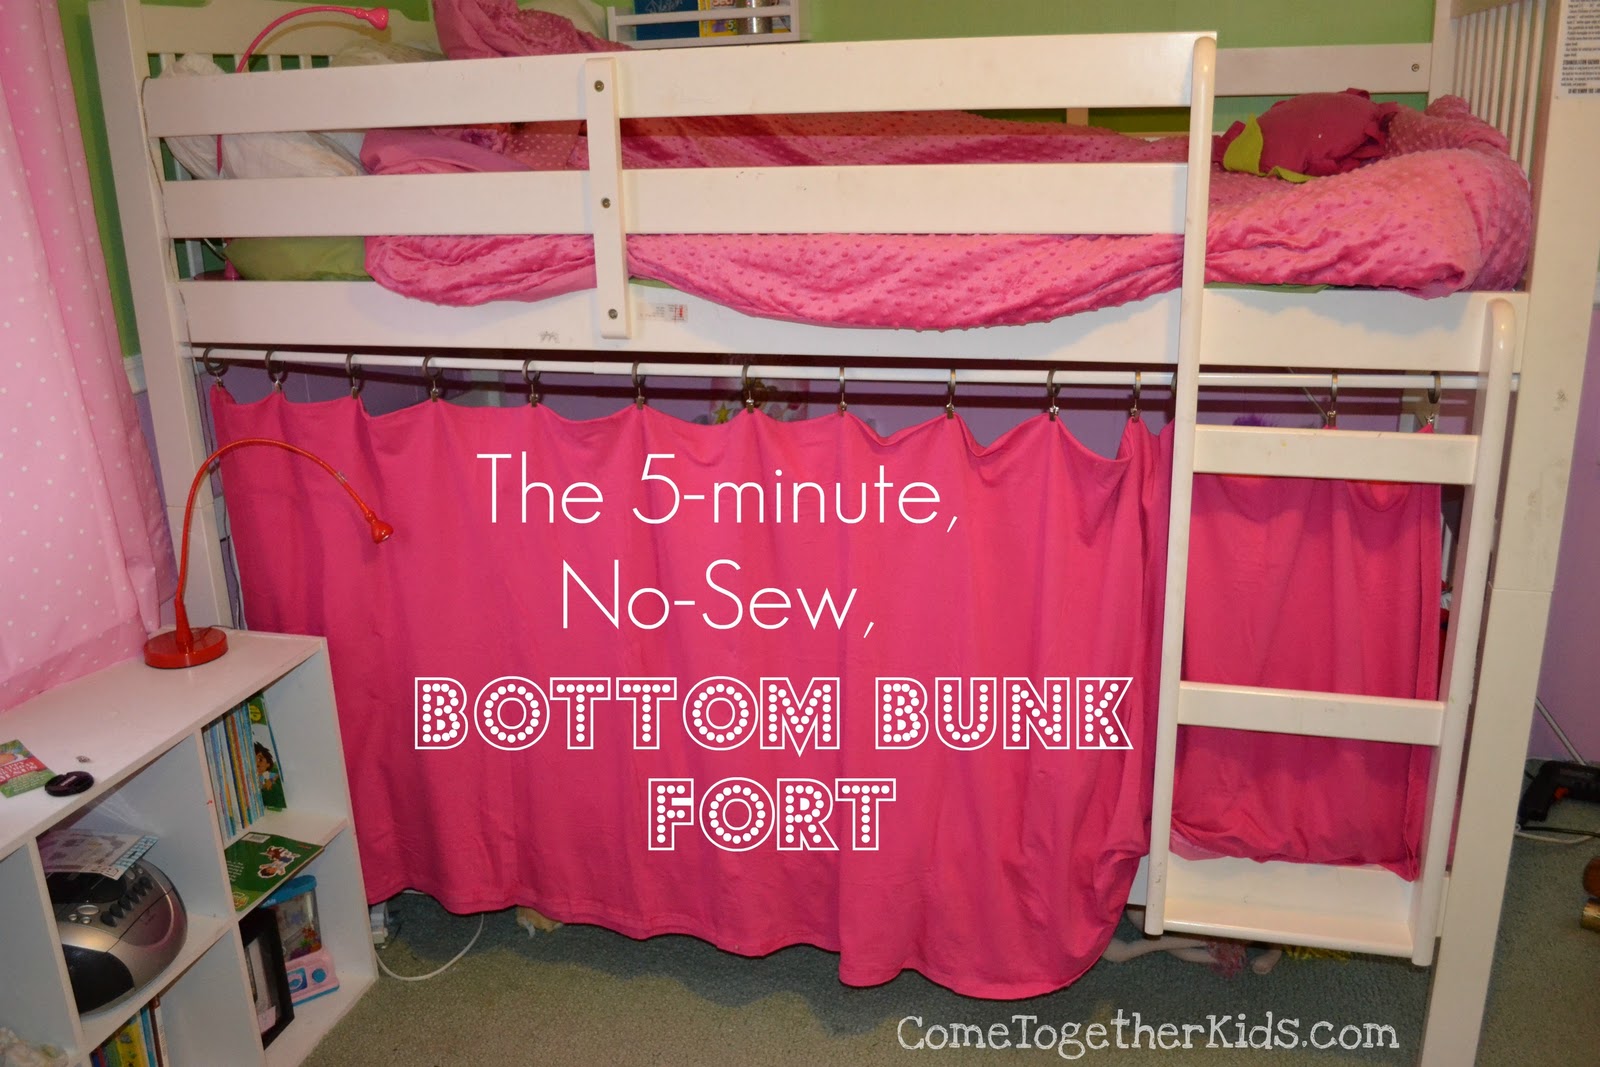 No Sew Bottom Bunk Fort, Bottom Bunk Bed Decorating Ideas